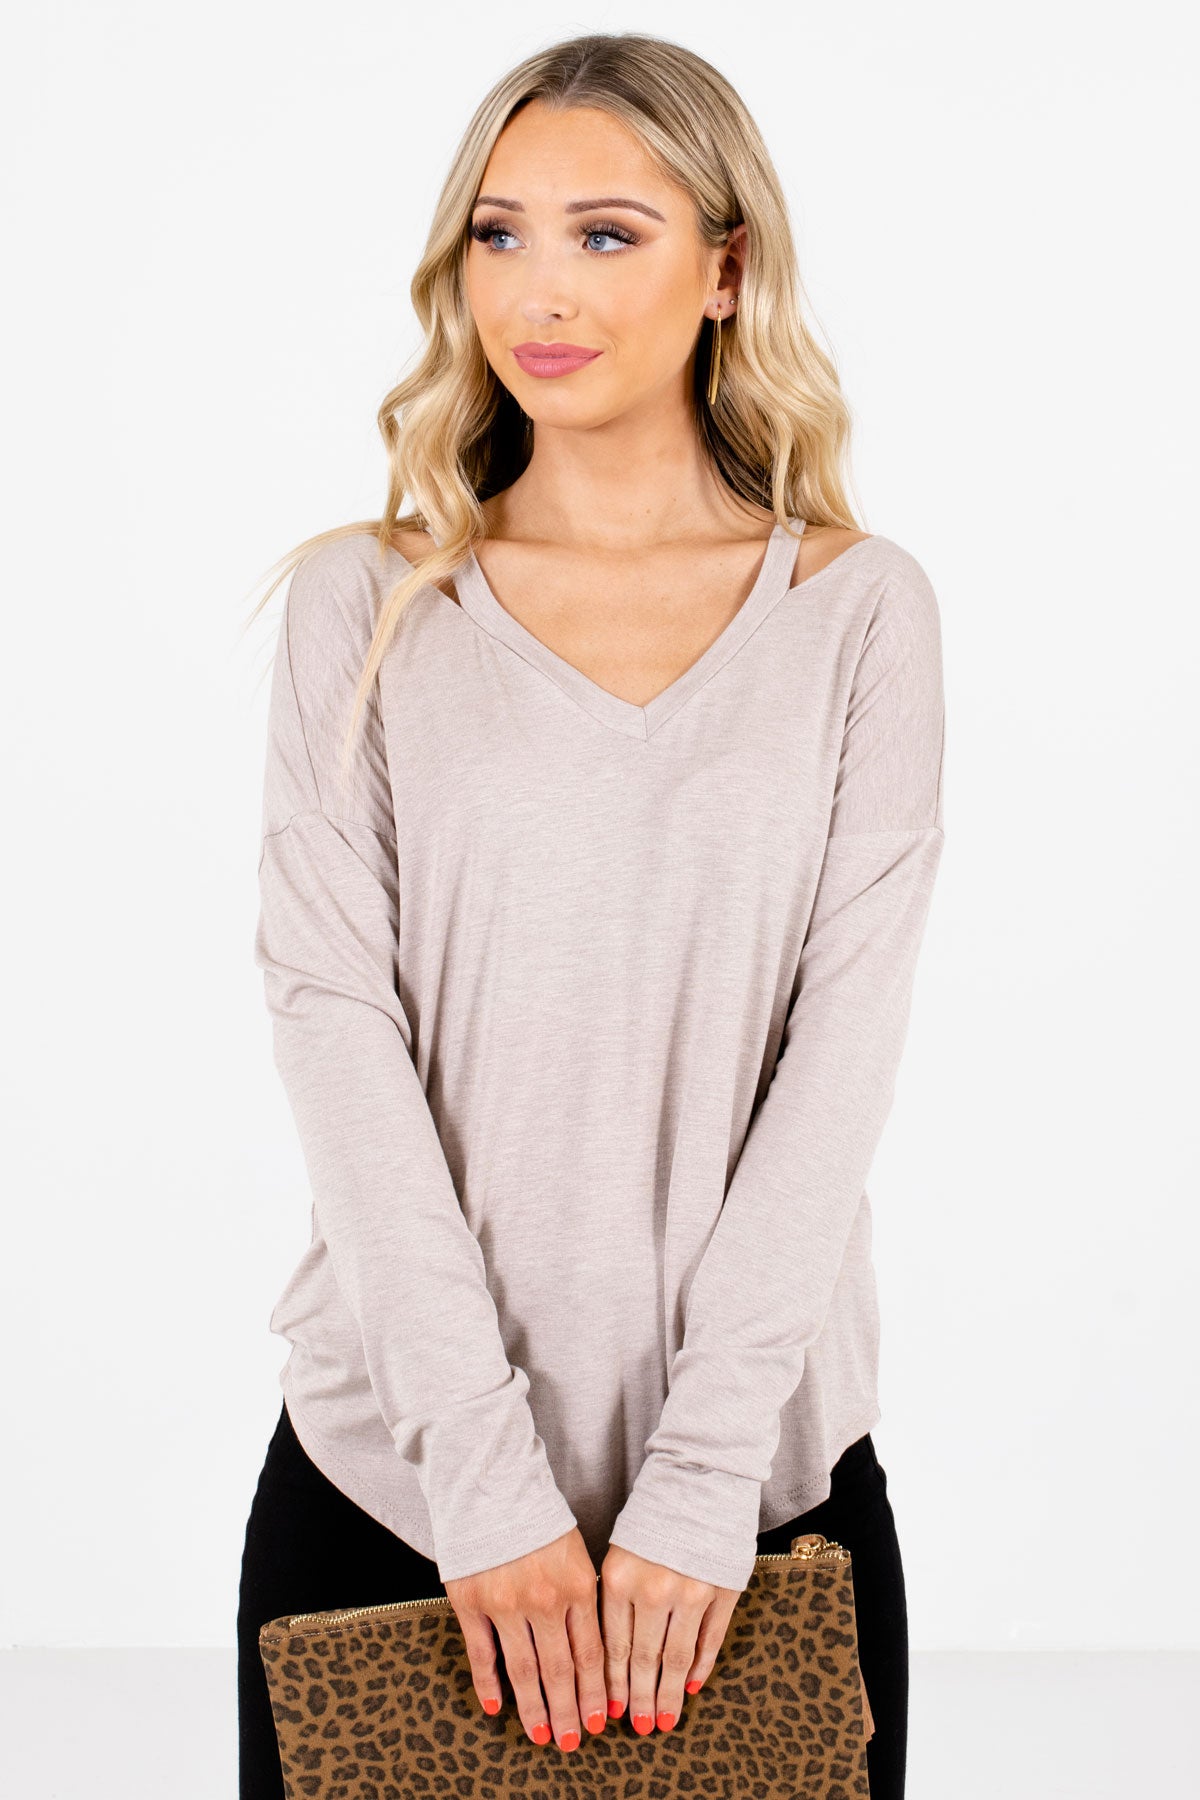 Women's Taupe Brown Basic Layering Boutique Tops